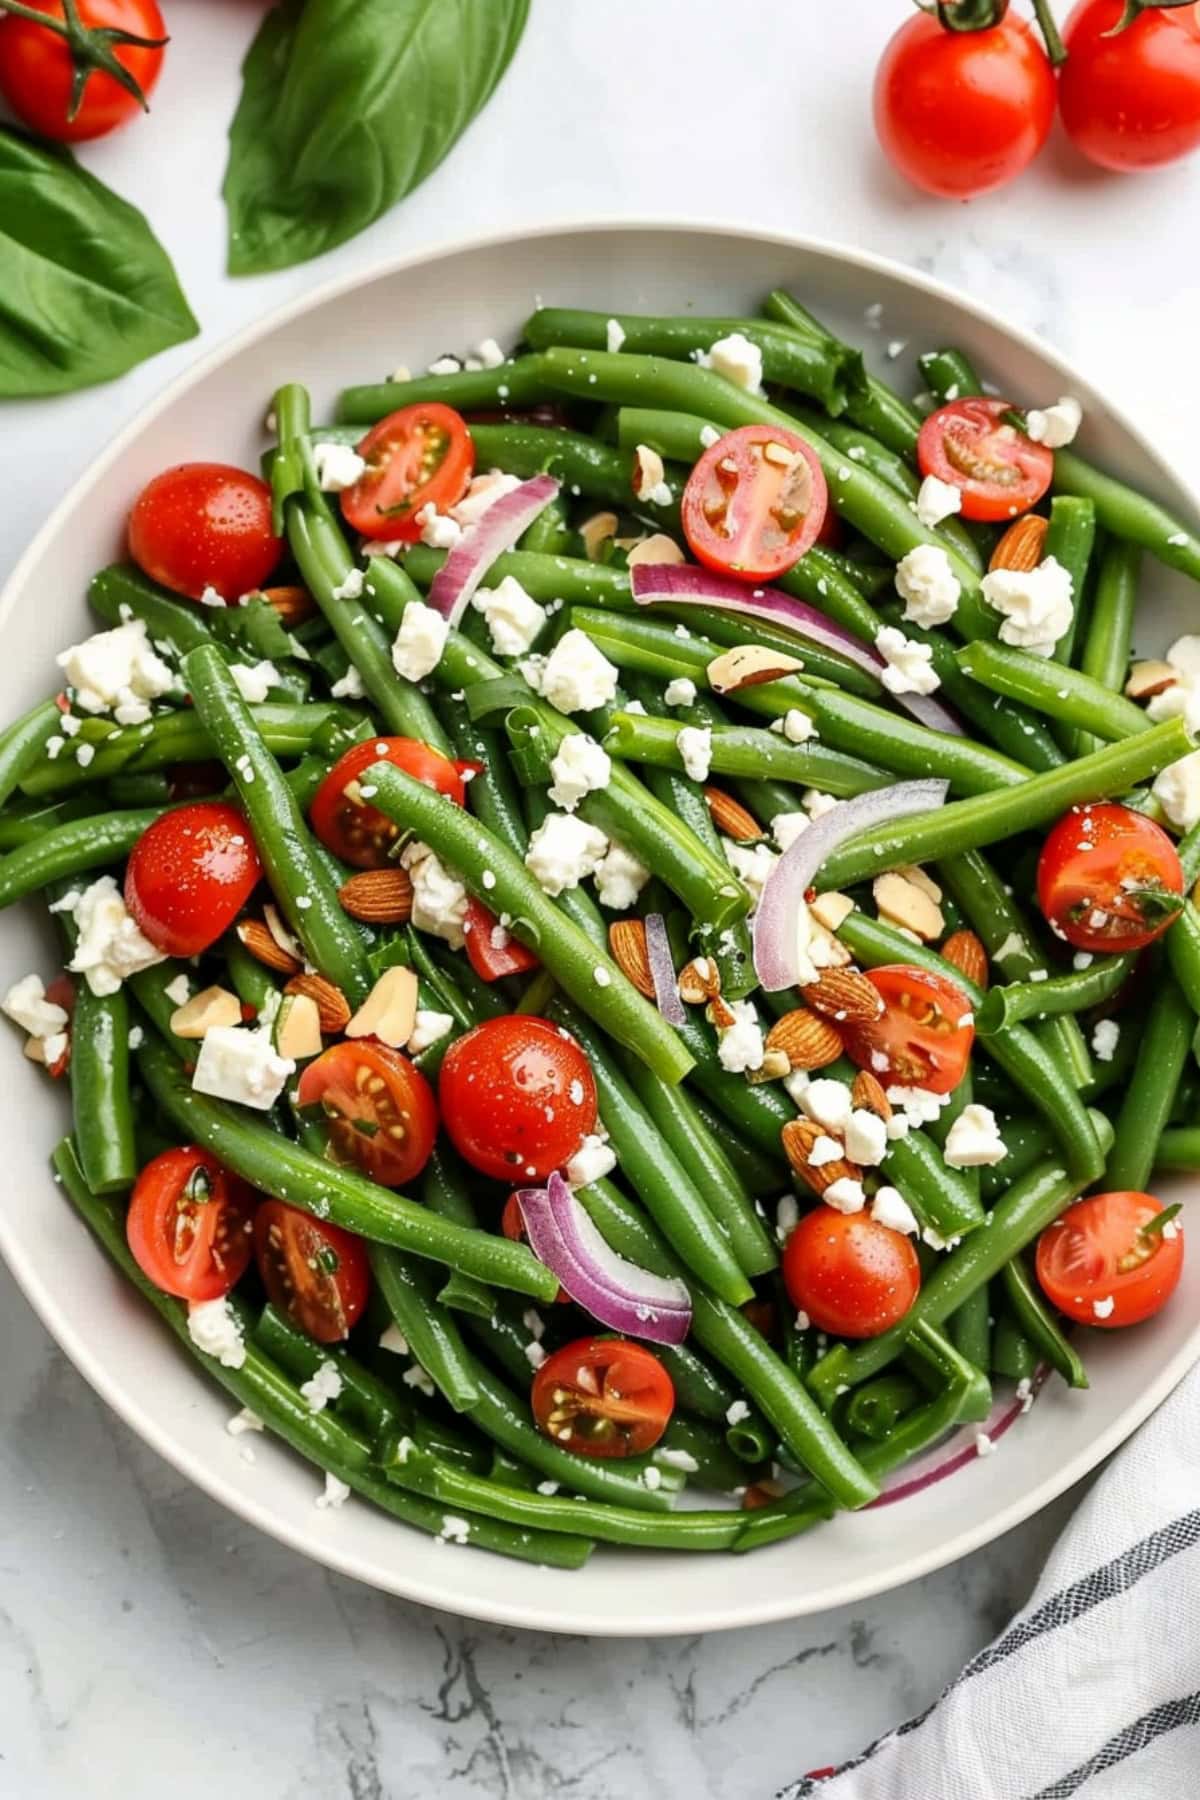 Green bean salad with cherry tomatoes, nuts, onions and feta cheese in a white bowl.